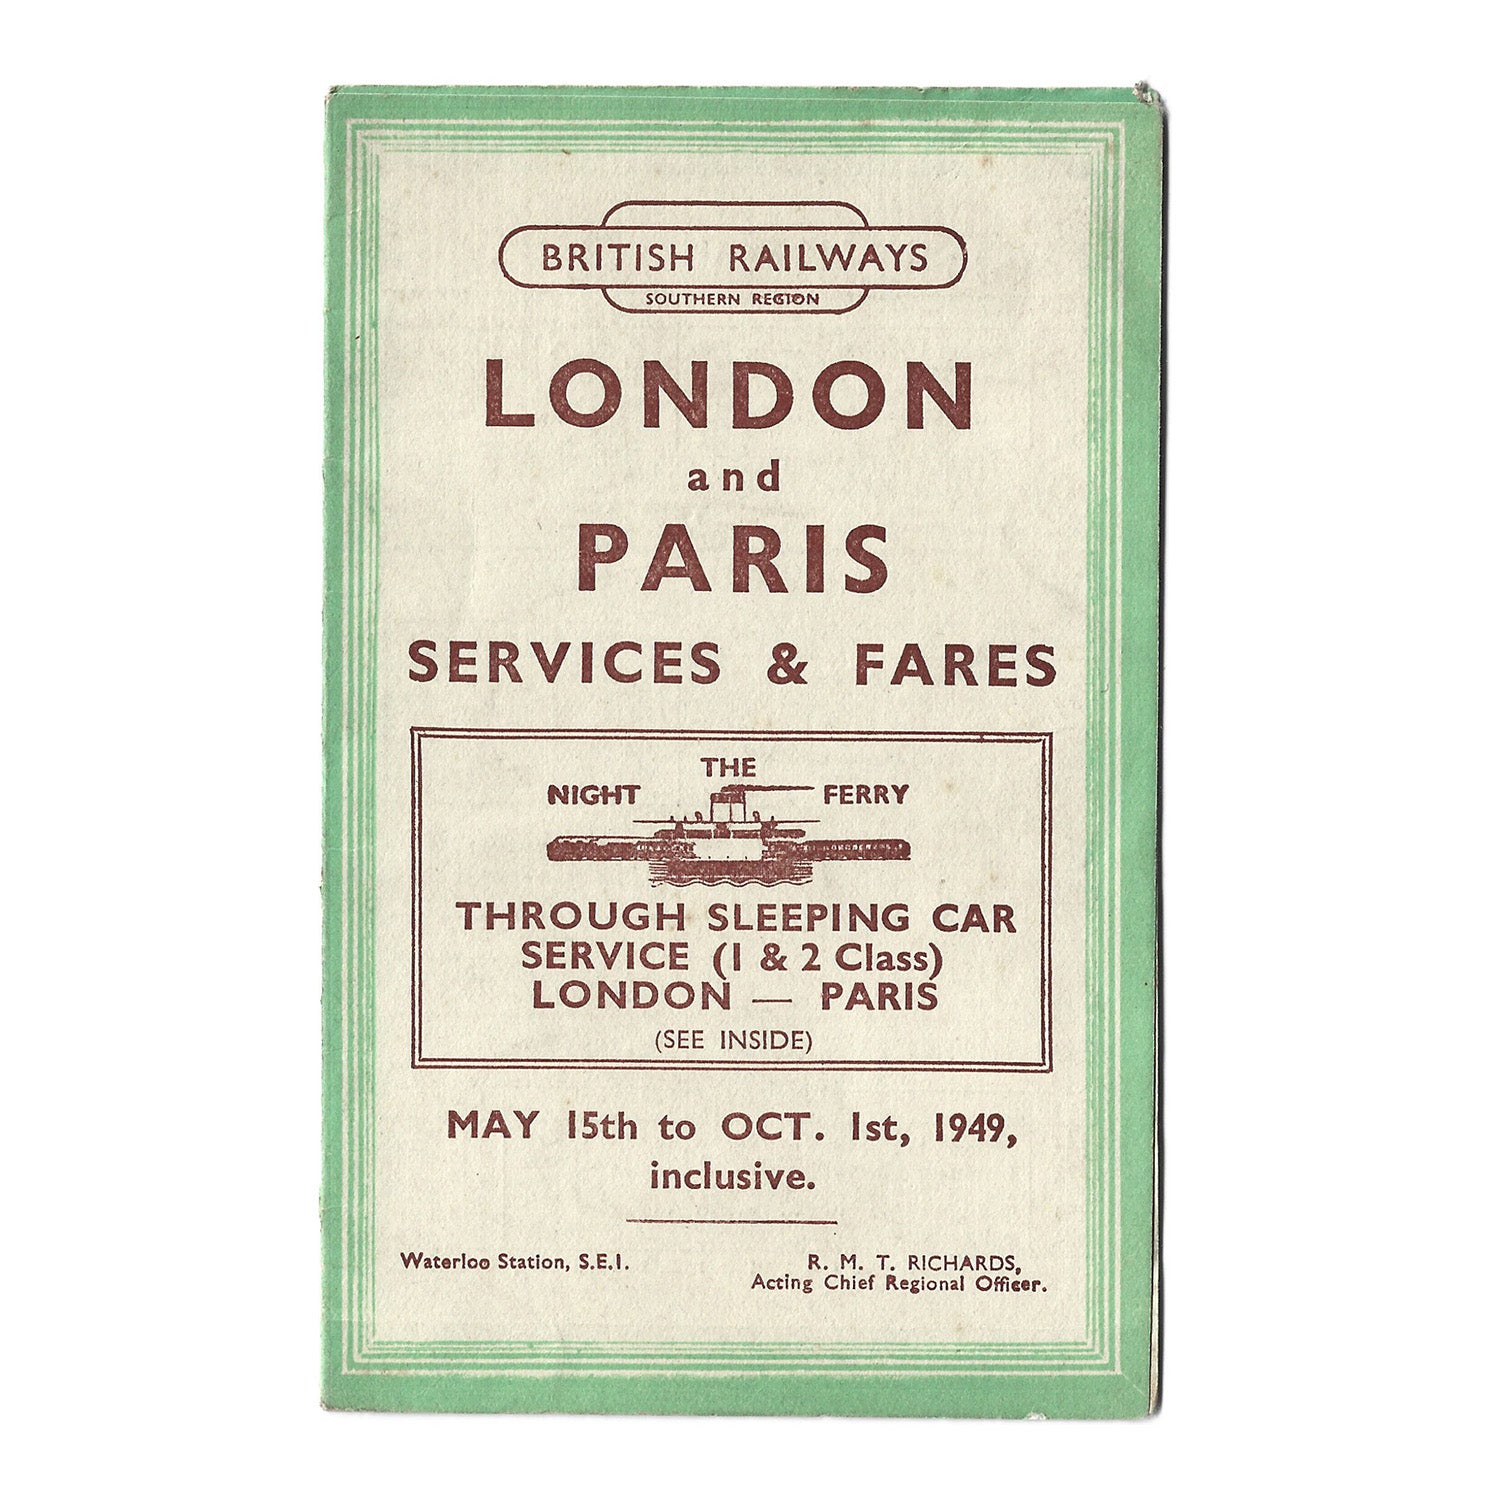 London and Paris, Services and Fares